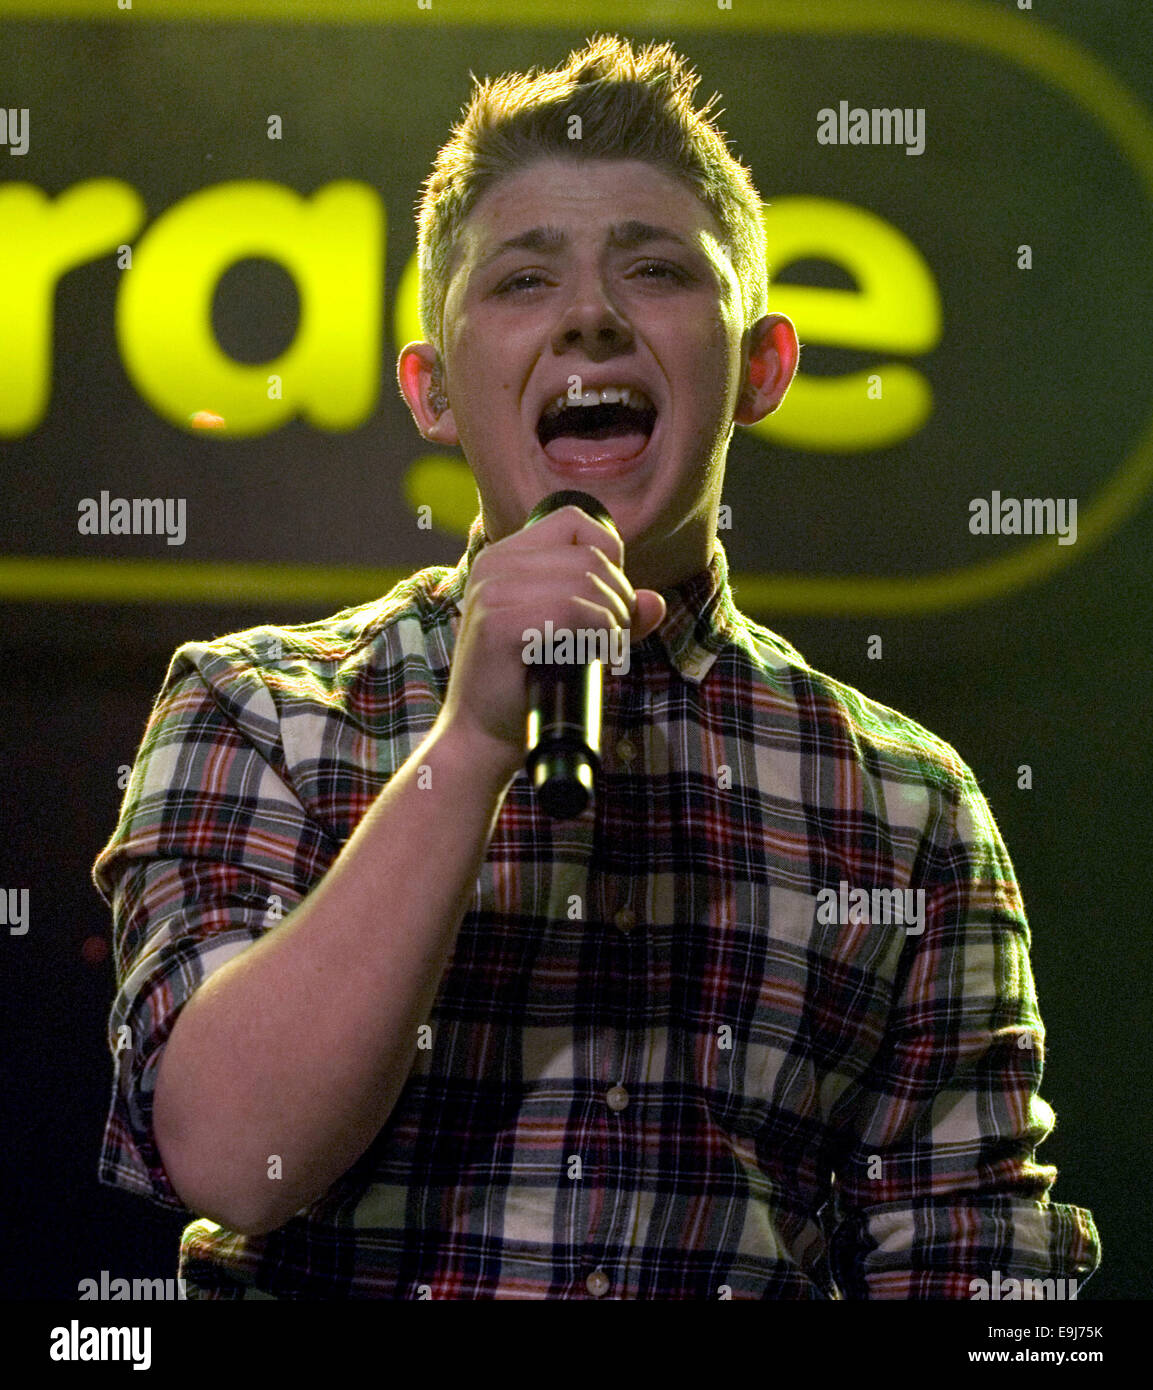 Nicholas McDonald, The X Factor series 10 runner up, headlining at the Garage in Glasgow  Featuring: Nicholas McDonald Where: Glasgow, Scotland, United Kingdom When: 25 Apr 2014 Stock Photo